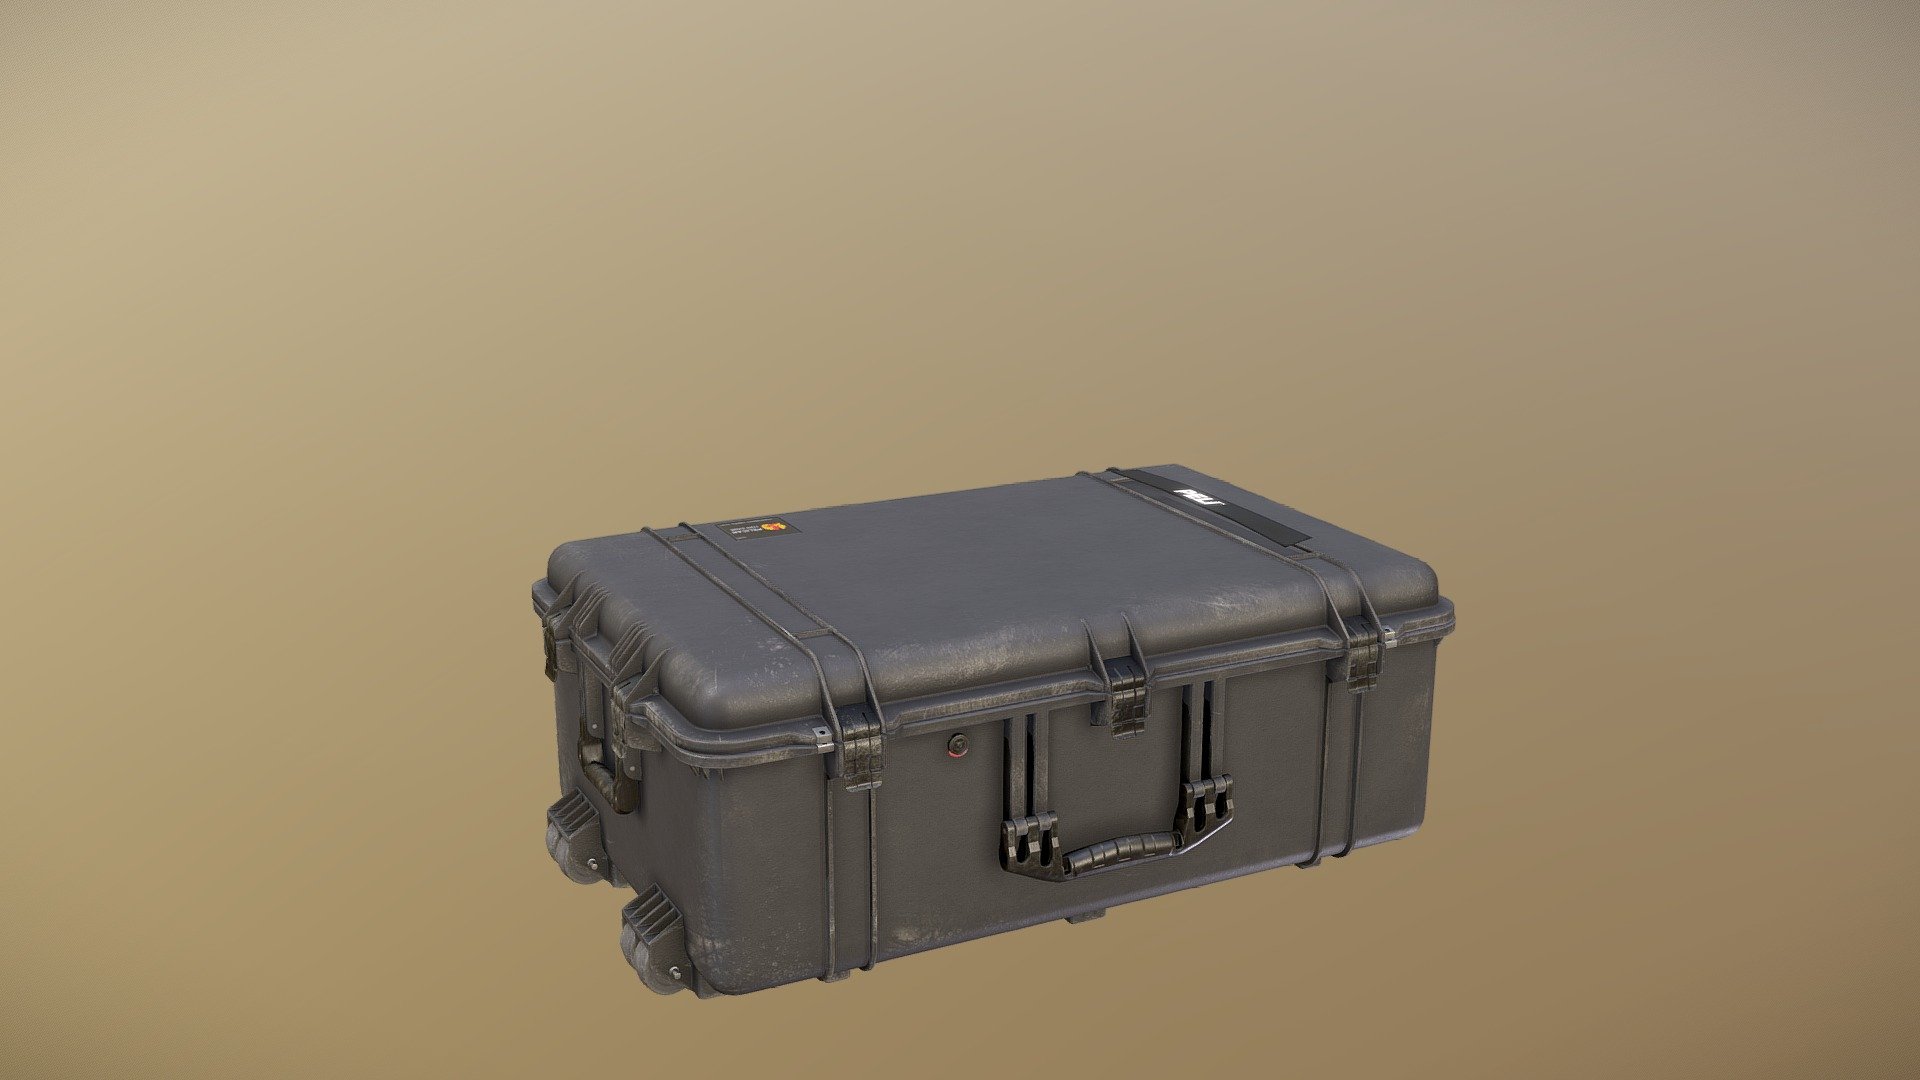 In-game mesh of a pelican ammo case. Prop available for sale, please give credit if possible and contact me if you would like to commision props. I can give a discount on a small bundle depending on how complex they are. I can also re-texture this to fit a specific theme for another $15 3d model